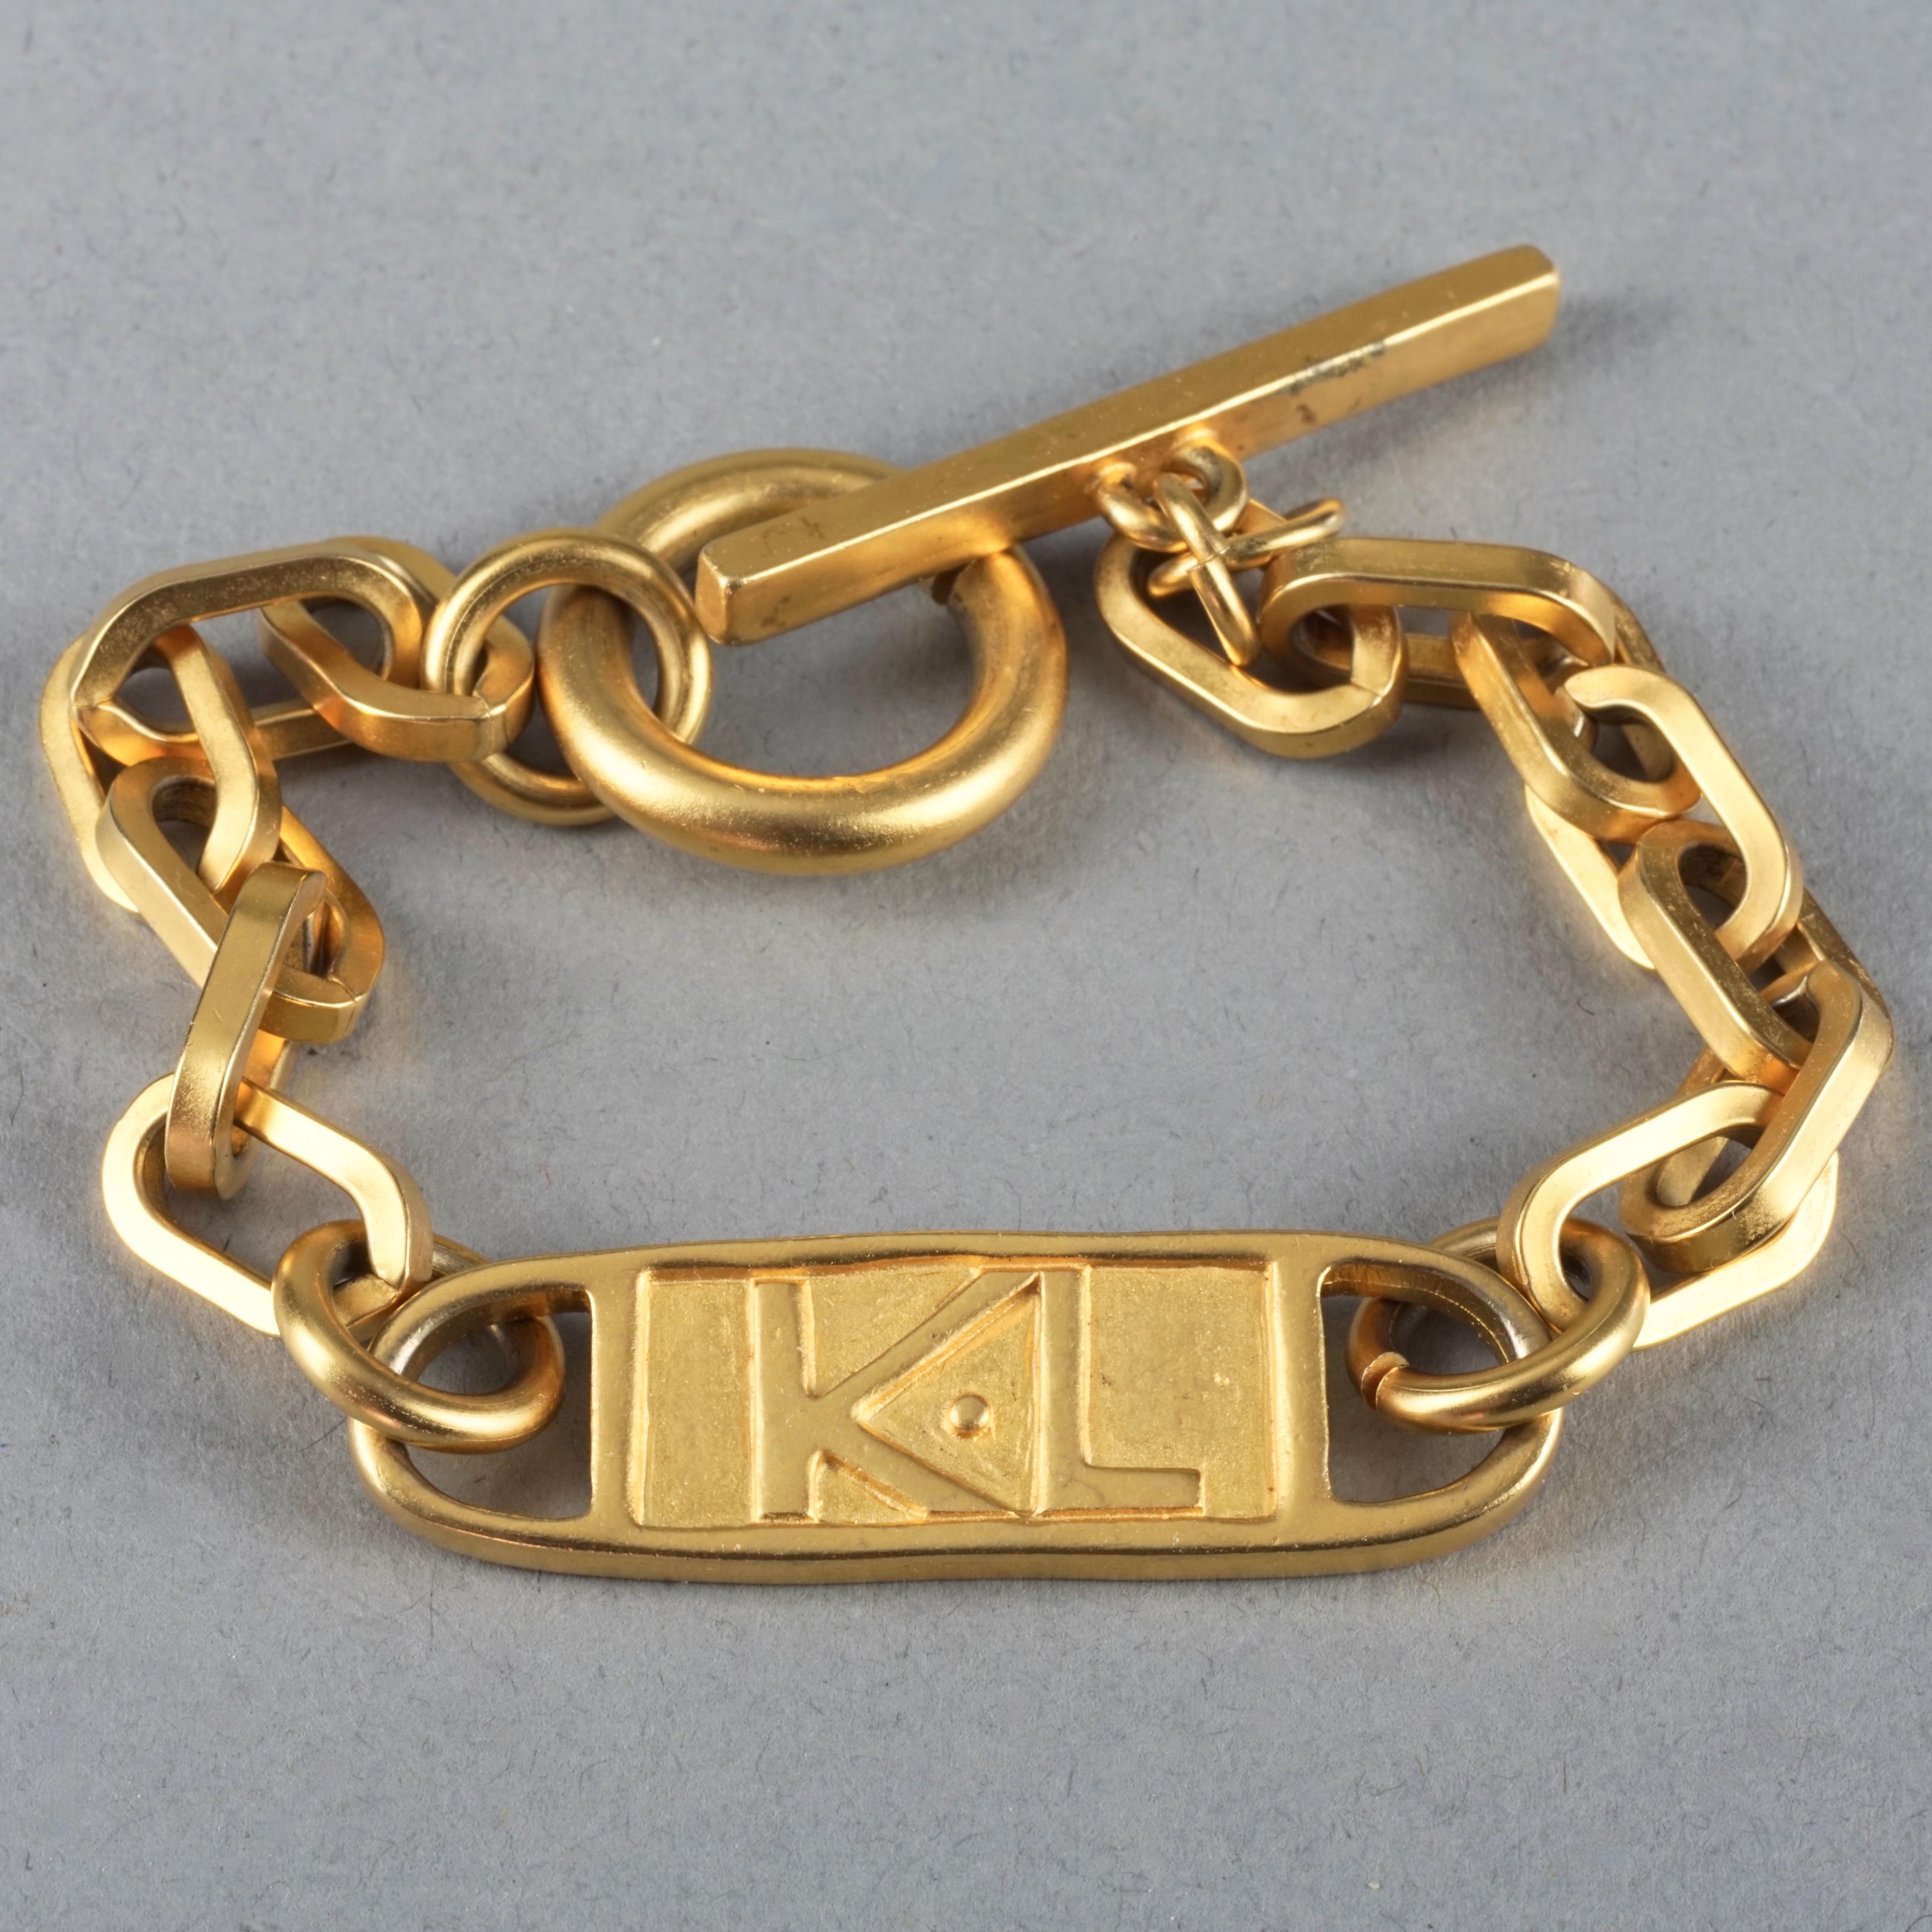 Vintage KARL LAGERFELD Logo ID Plate Chain Bracelet In Excellent Condition For Sale In Kingersheim, Alsace